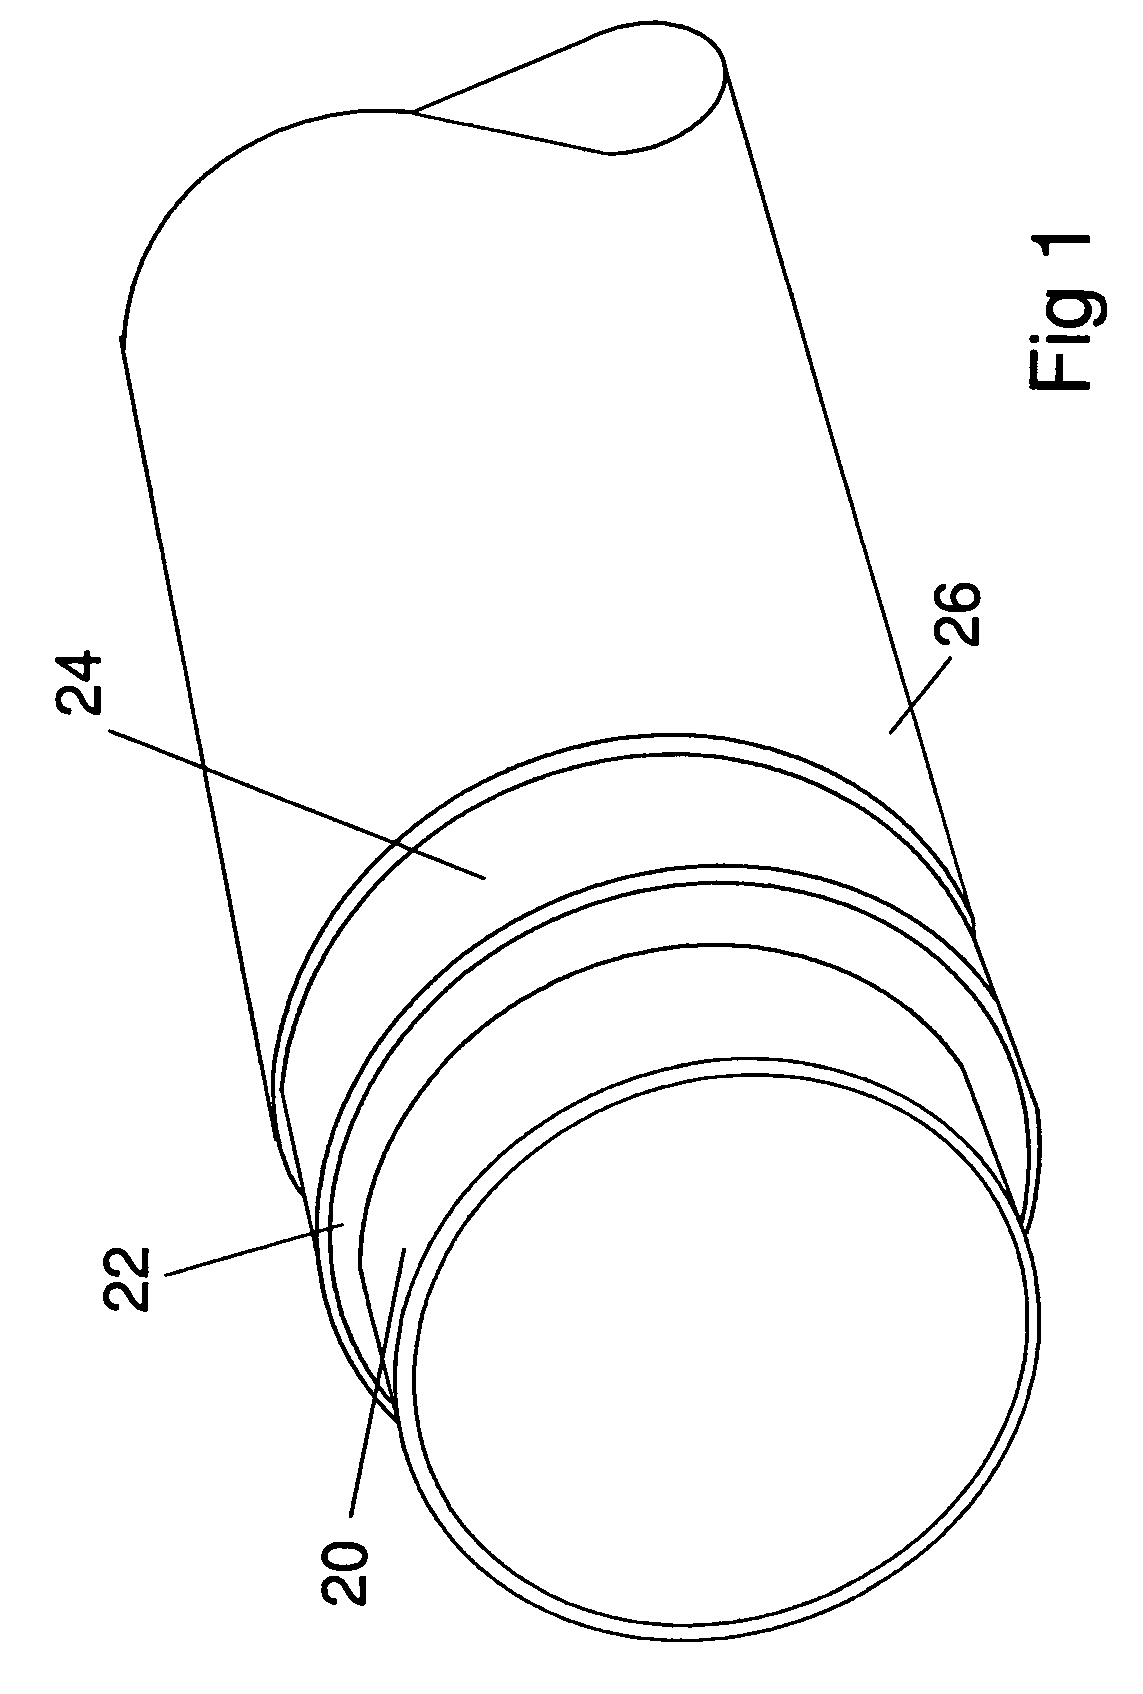 Advance instrumentation methods for pipes and conduits transporting cryogenic materials